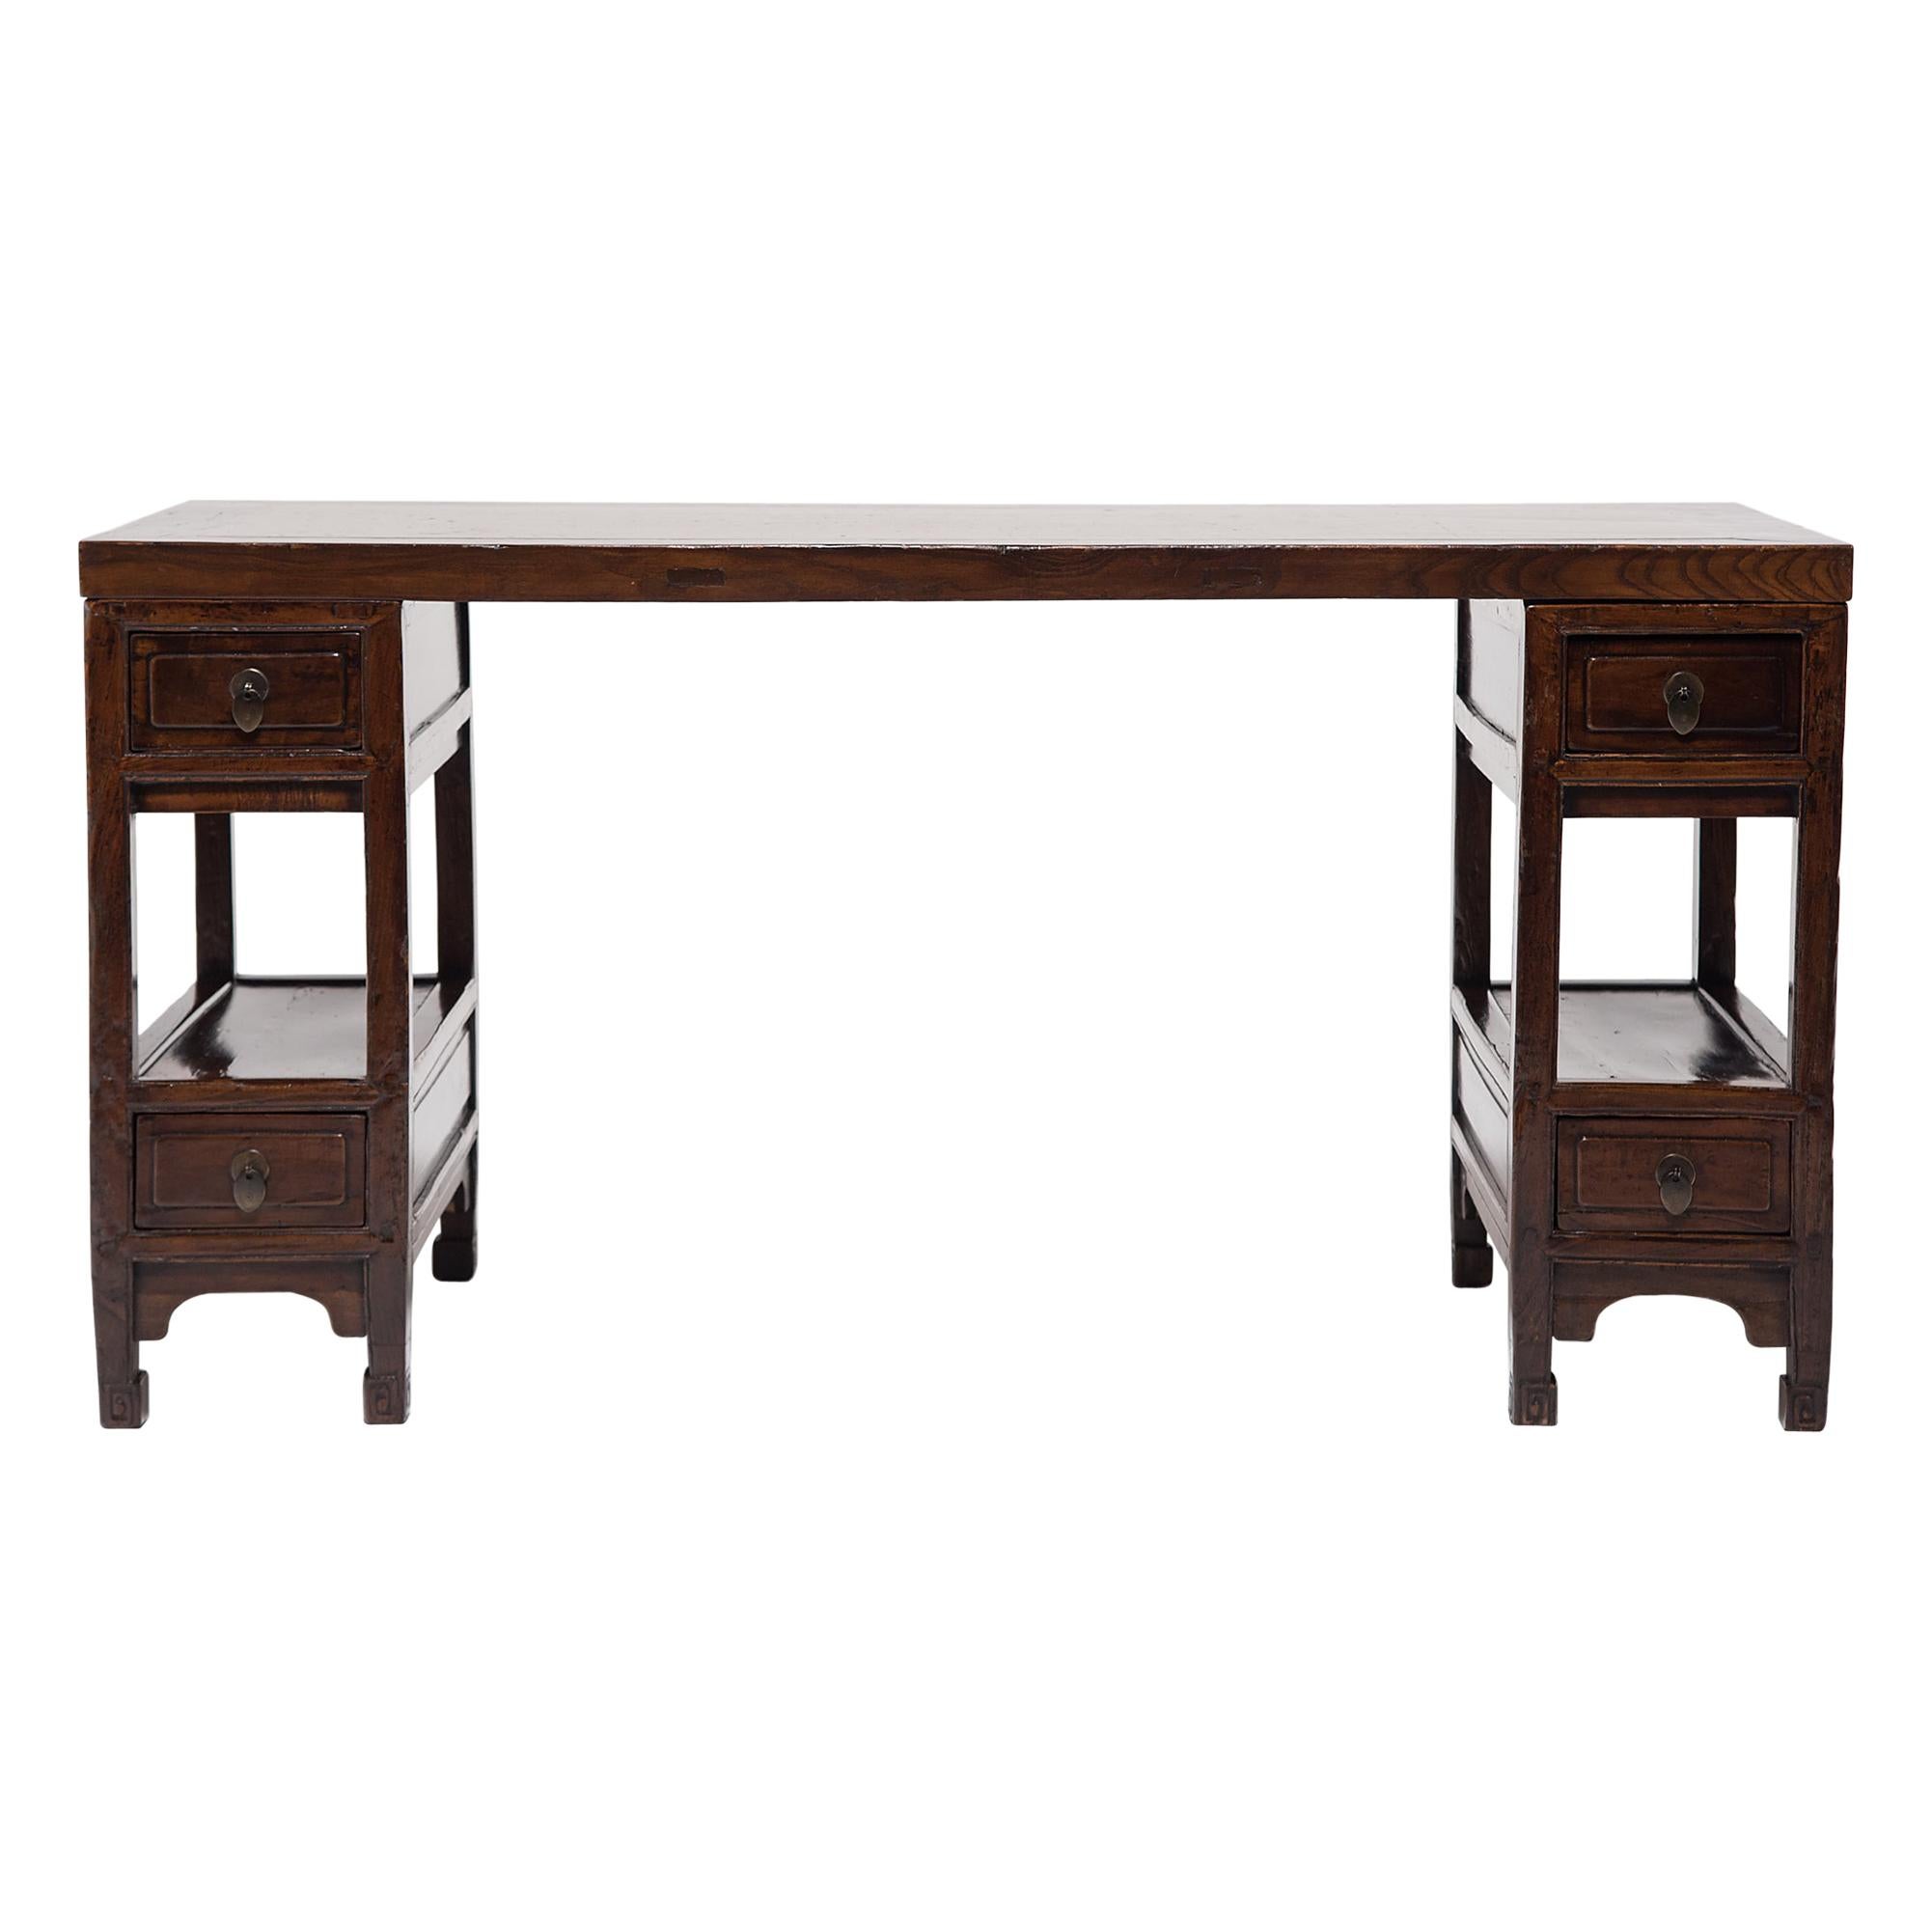 Chinese Partner's Desk with Puddingstone Top, c. 1850